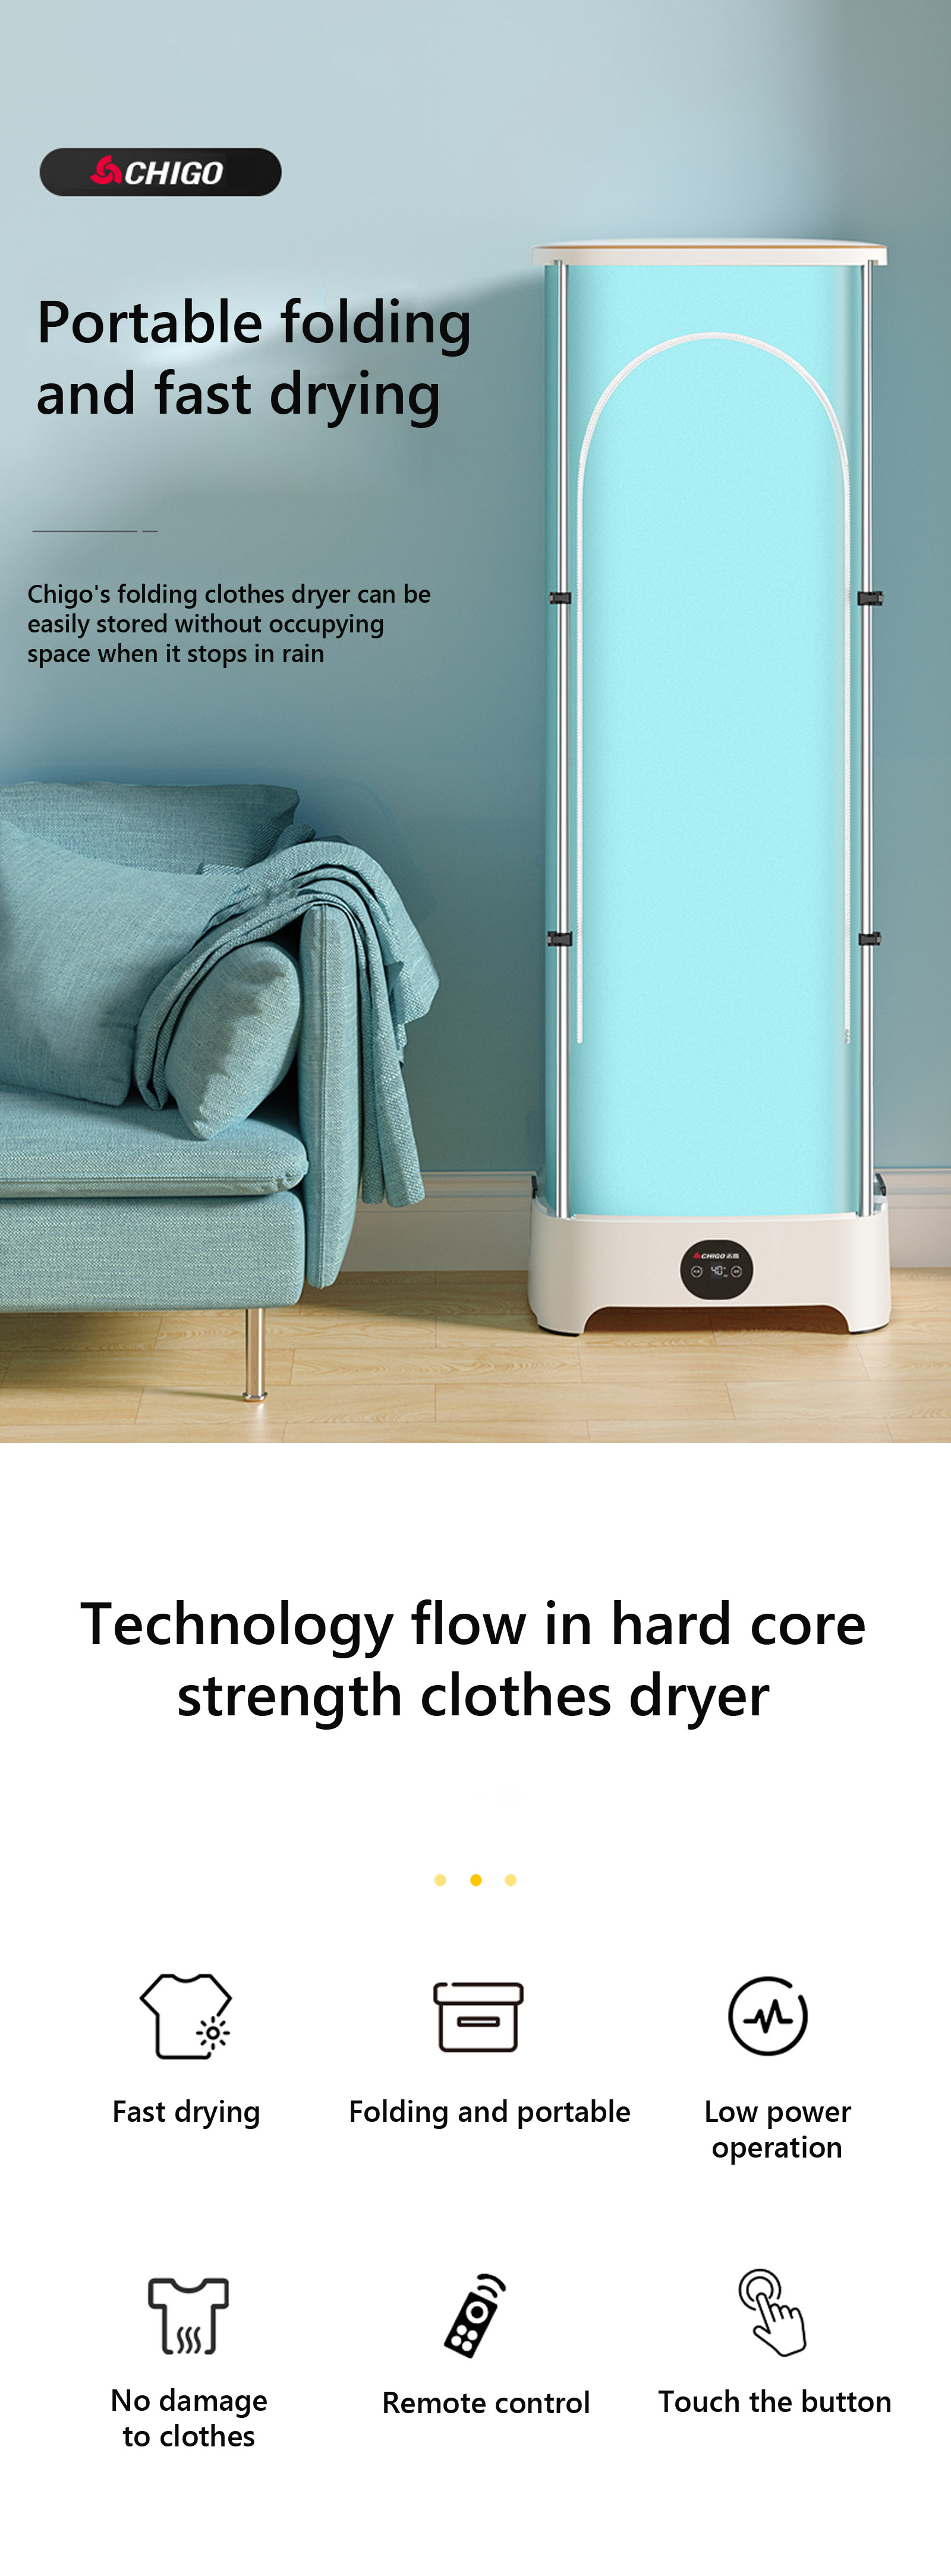 Details about   Wall-mounted Folding Clothes Quick-drying Sterilization Portable Dryer Malata 